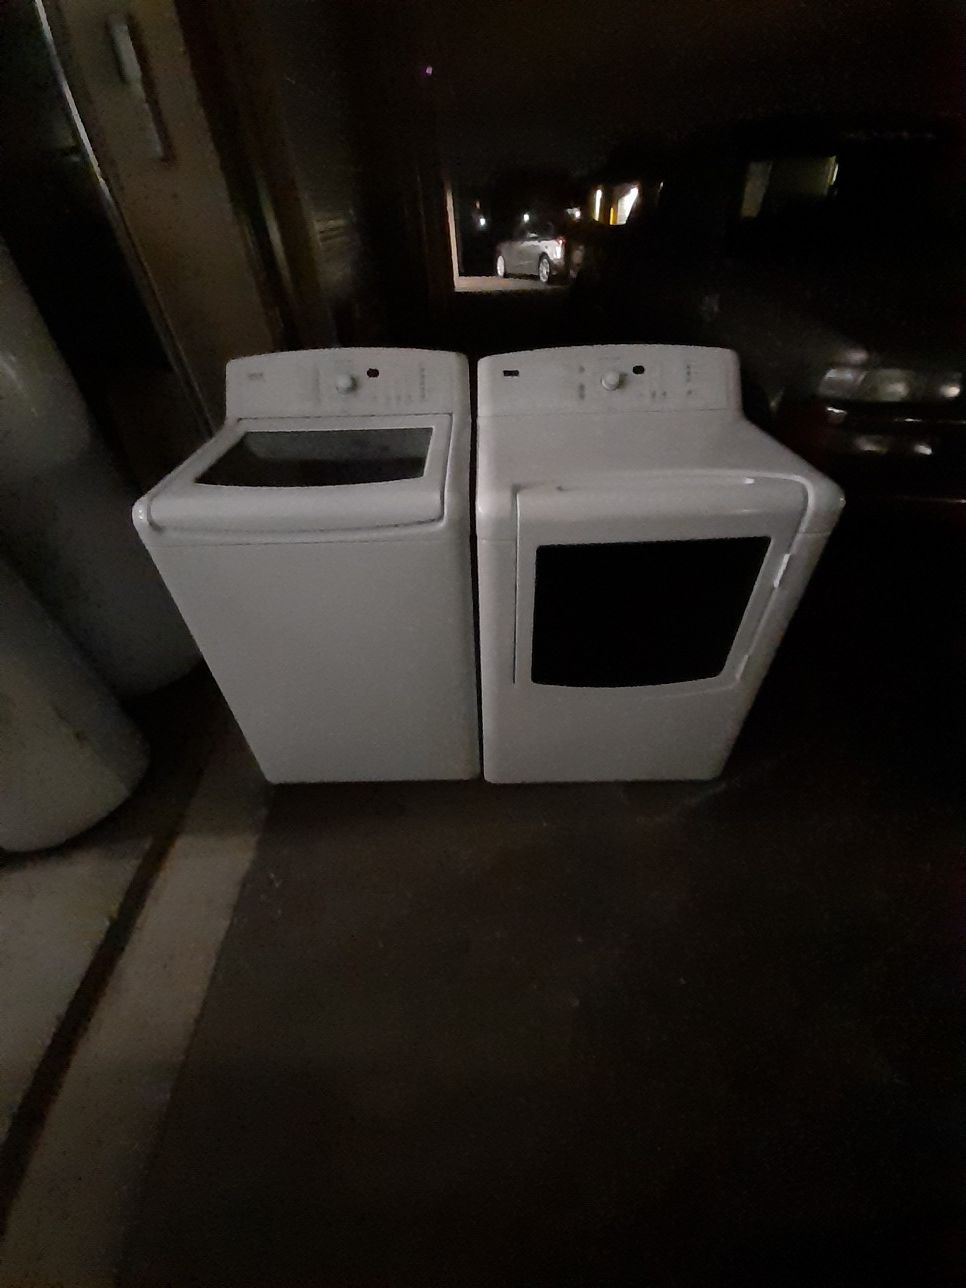 KENMORE ELITE OASIS WASHER AND DRYER SET